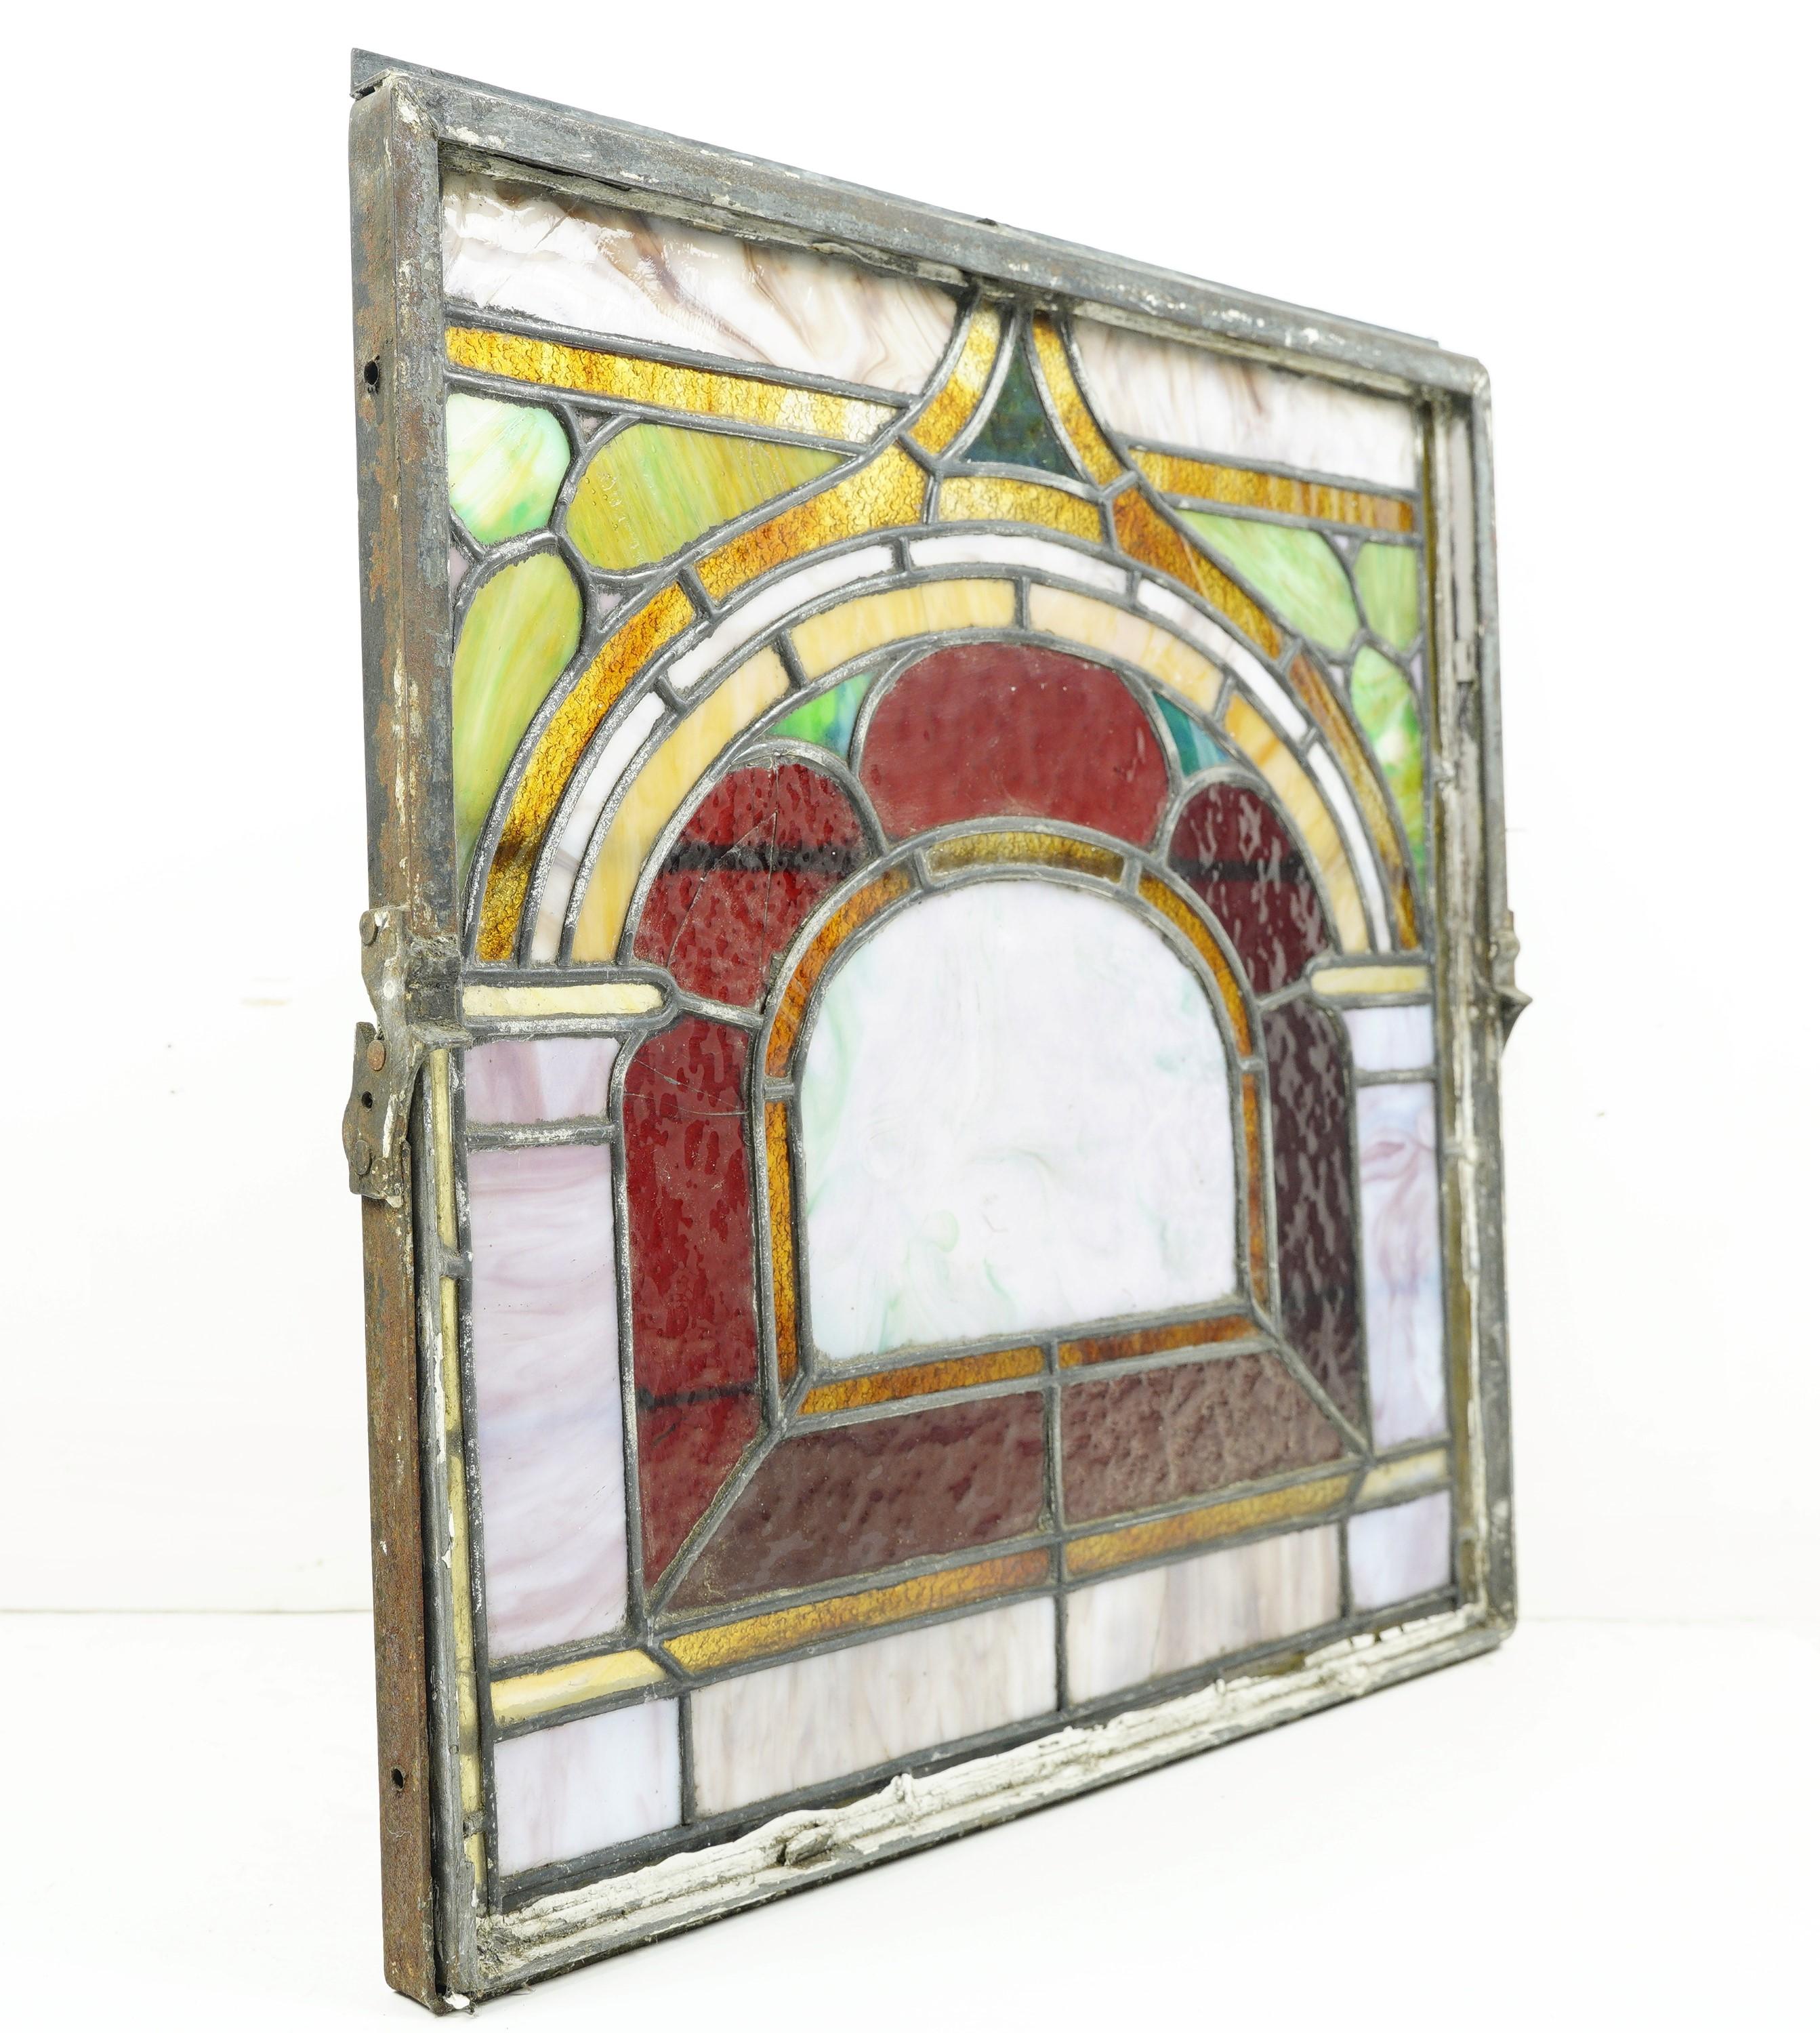 Rescued 2 Foot Square Arched Stained Glass Window 5